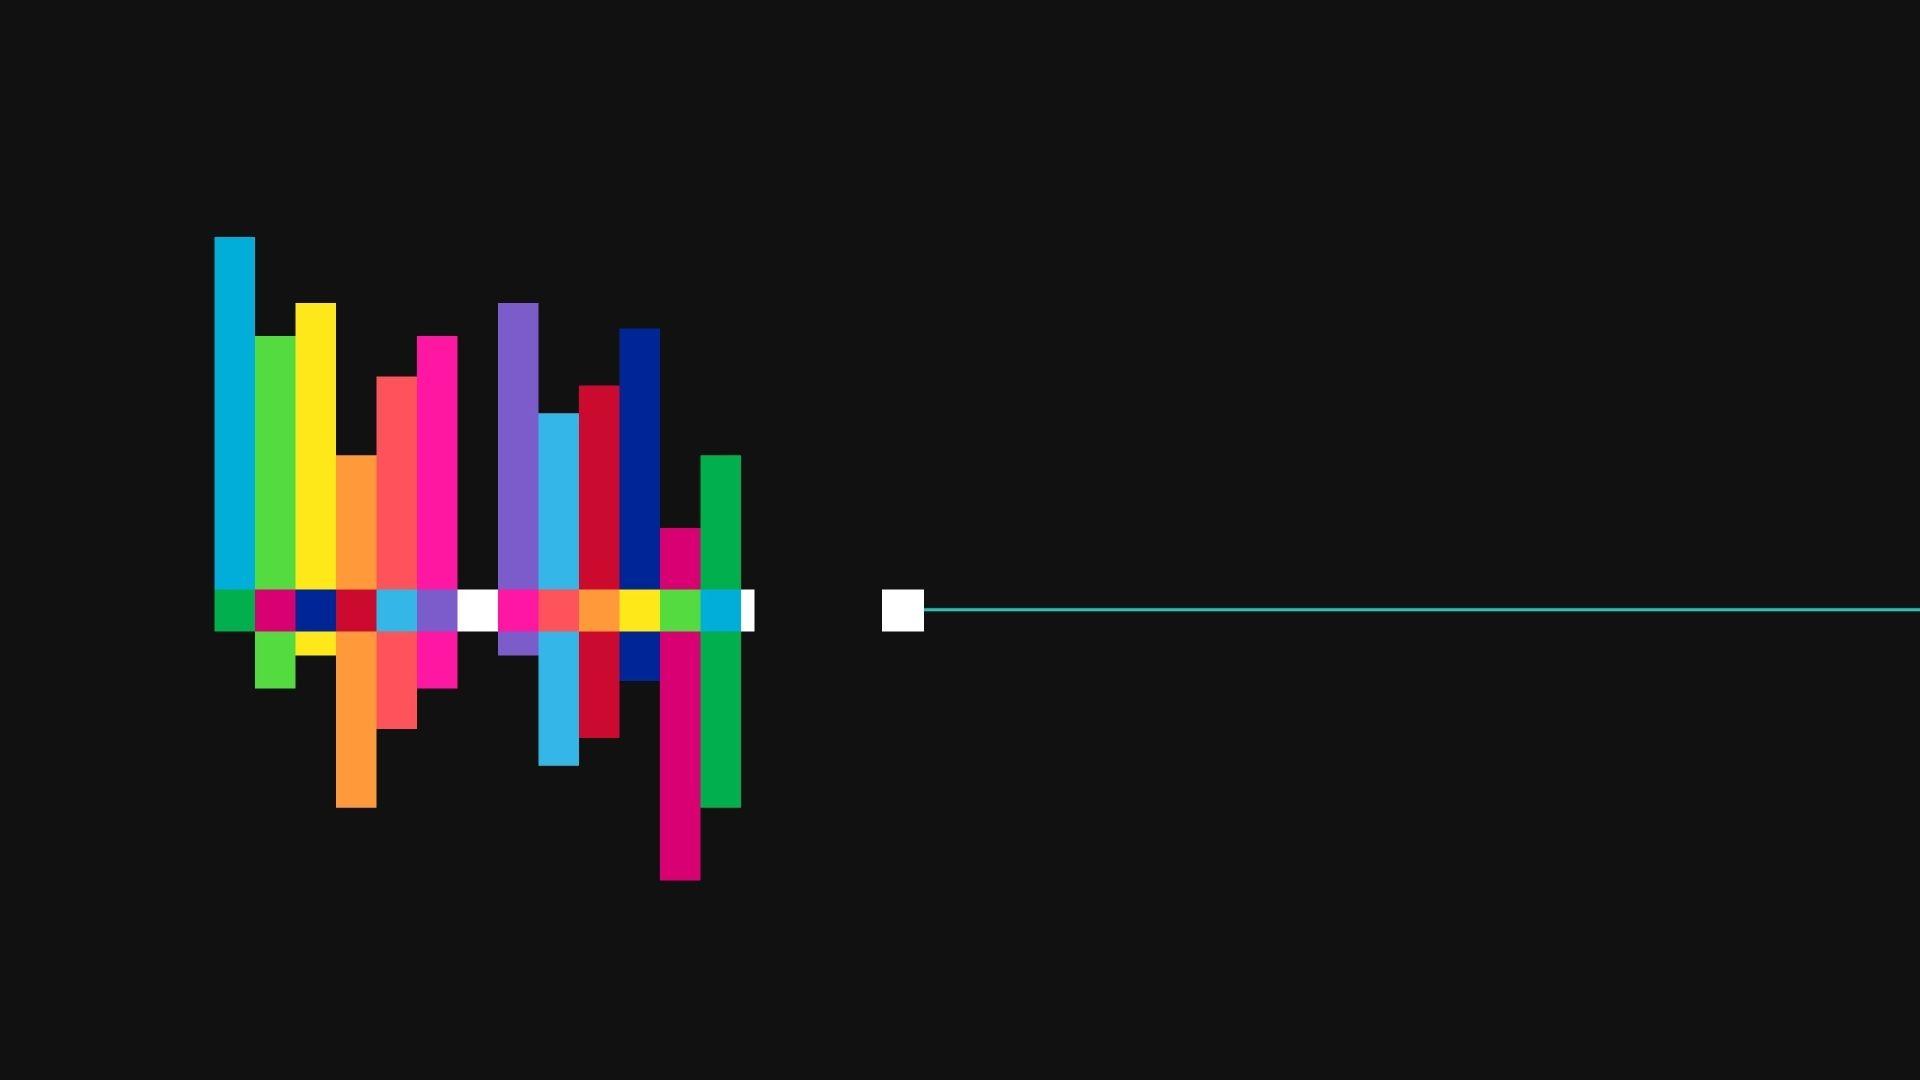 Colorful sound waves Mac Wallpaper Download. Free Mac Wallpaper Download. Statistics wallpaper, Sound waves, Mac wallpaper